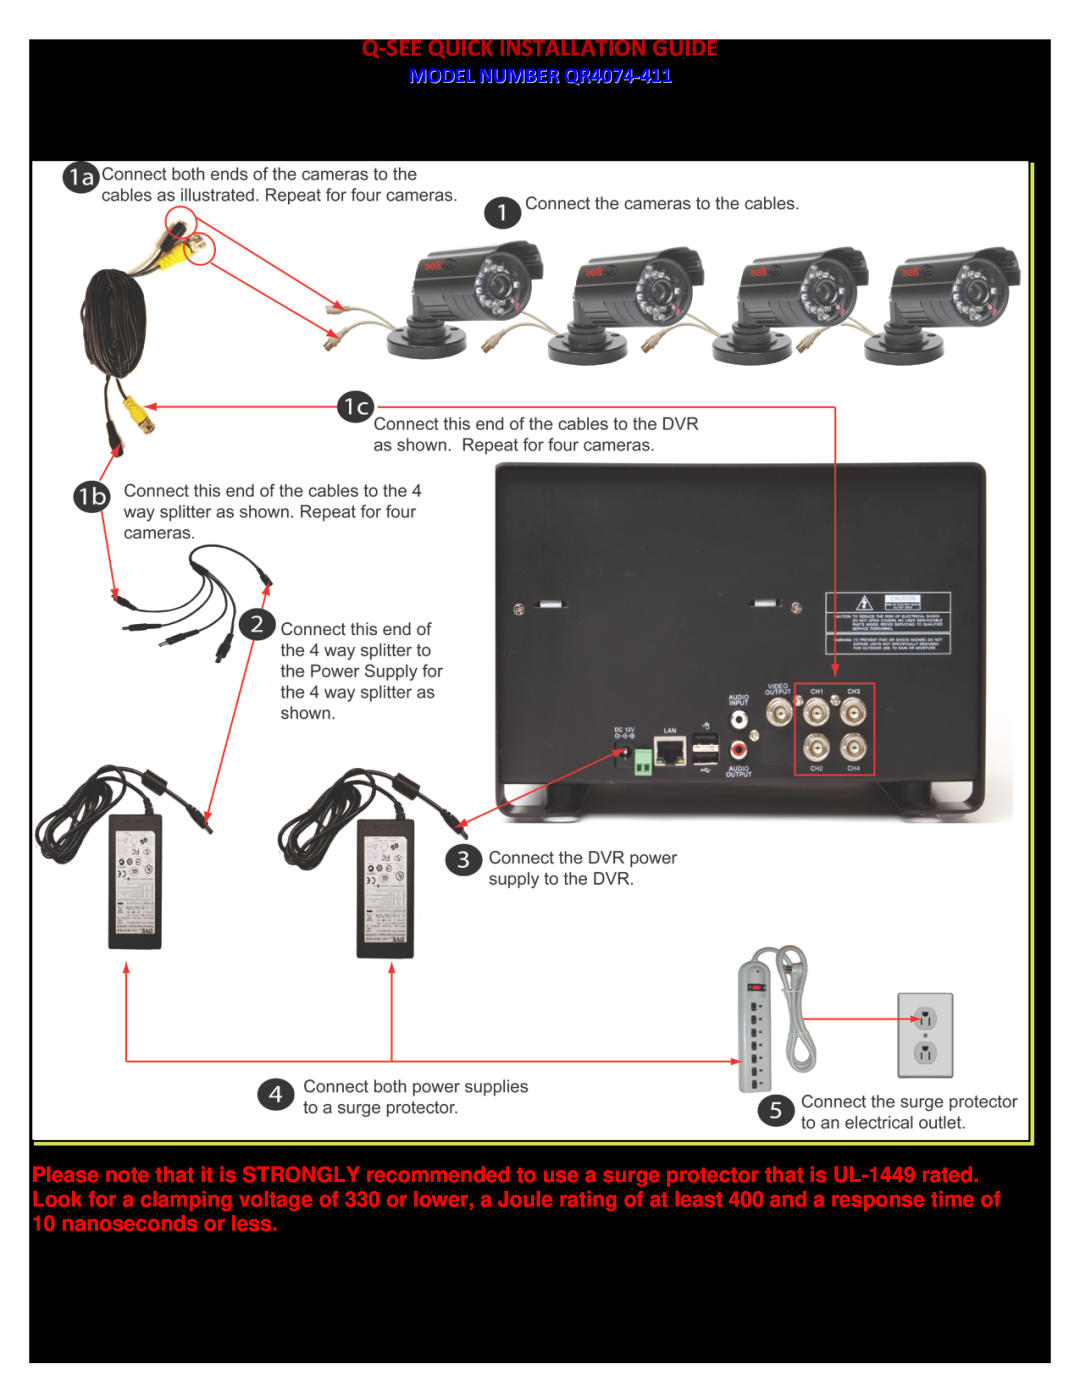 Q-See QR4074-411 manual PART 2 - DVR CAMERA AND POWER CONNECTIONS, P a g e, Q-Seequick Installation Guide 